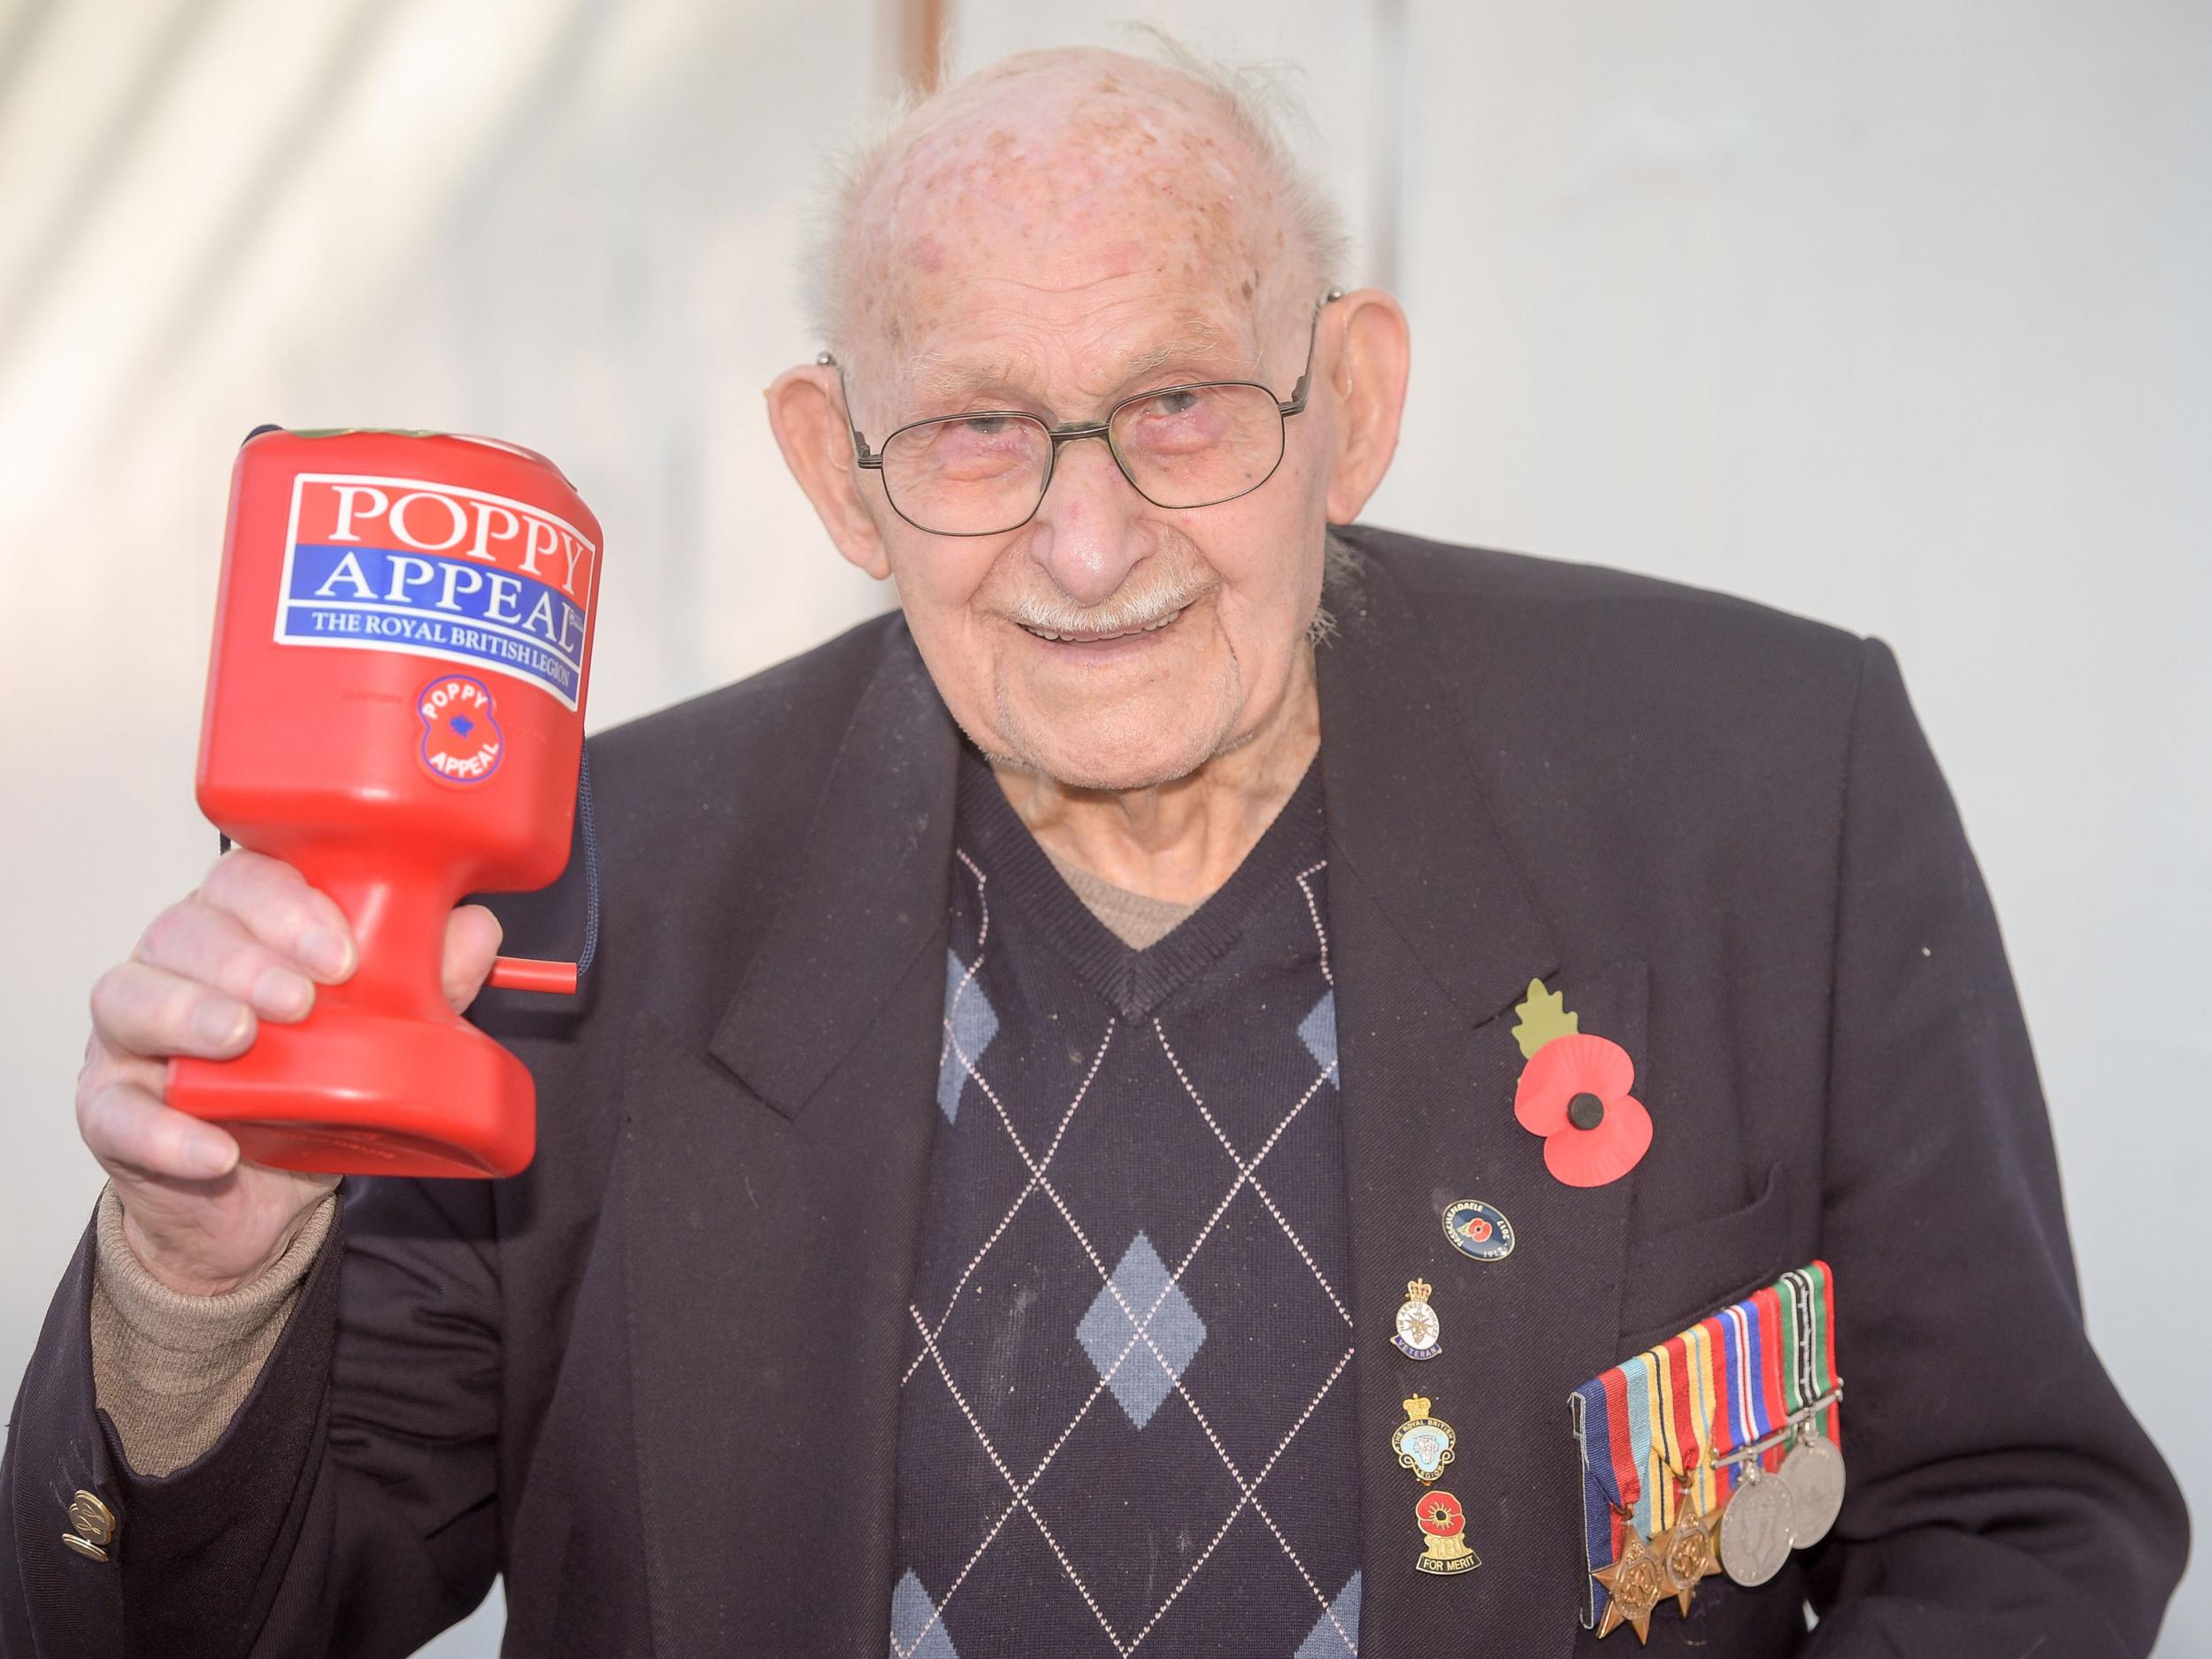 Poppy seller Ron Jones, who is 100 years old, holds his collection box outside a Tesco supermarket in Newport